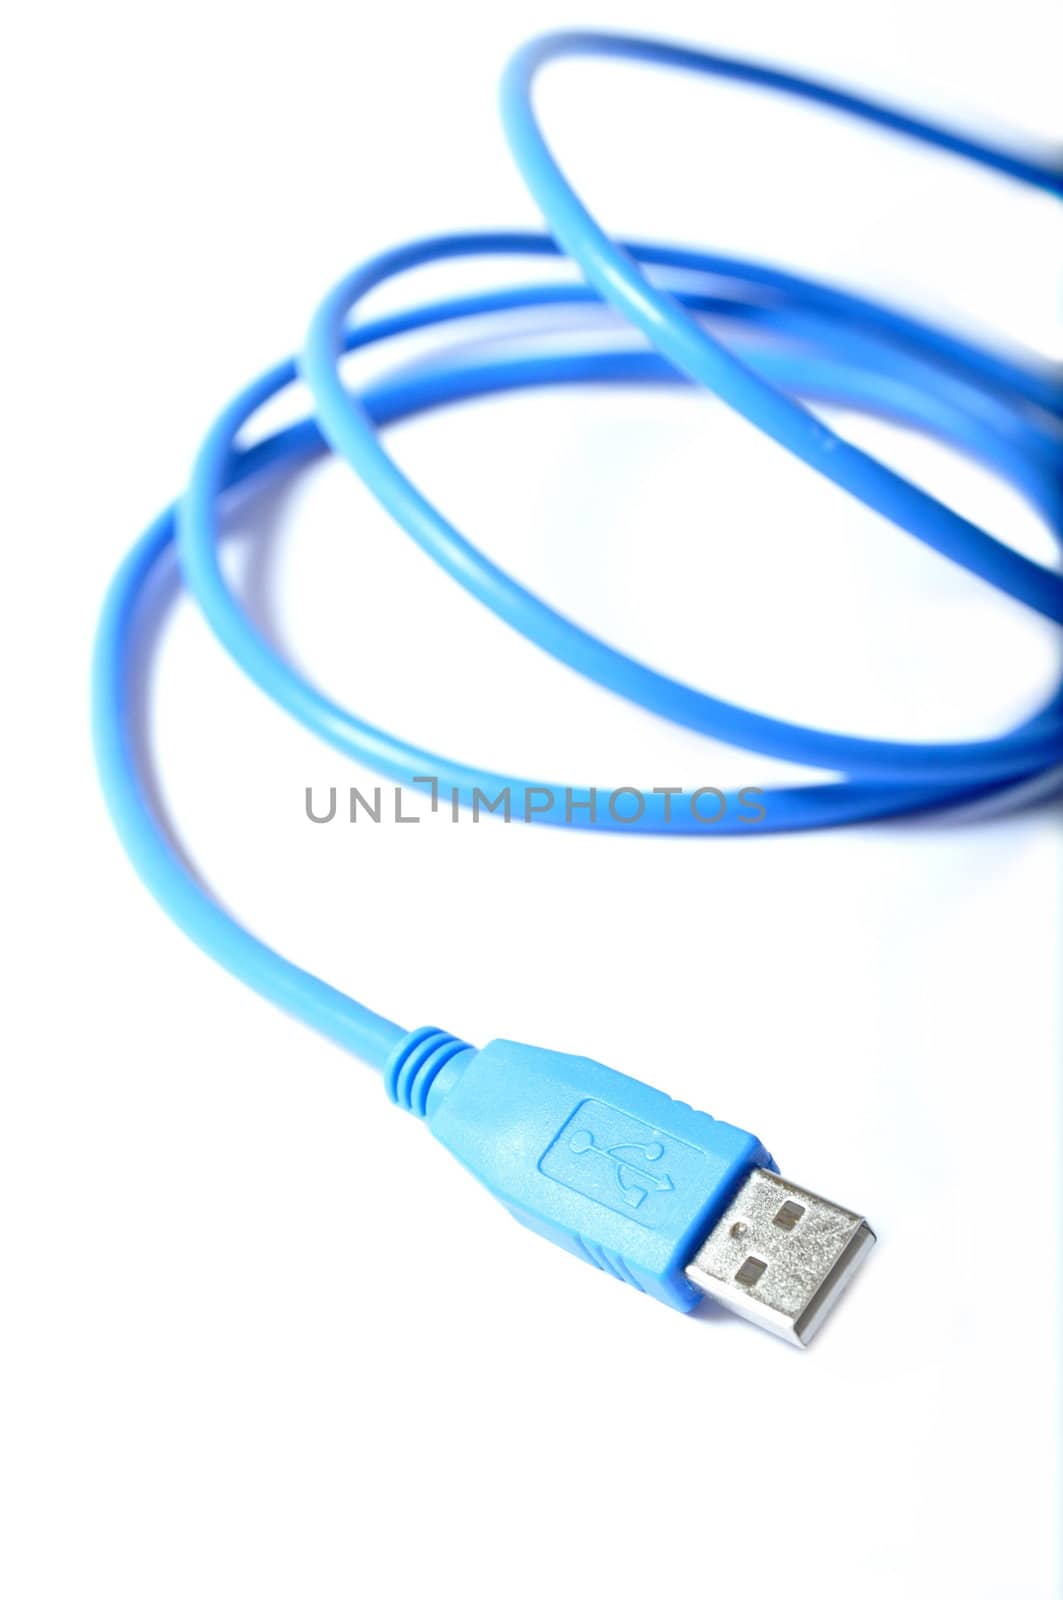 Blue USB cable on wite background by anderm